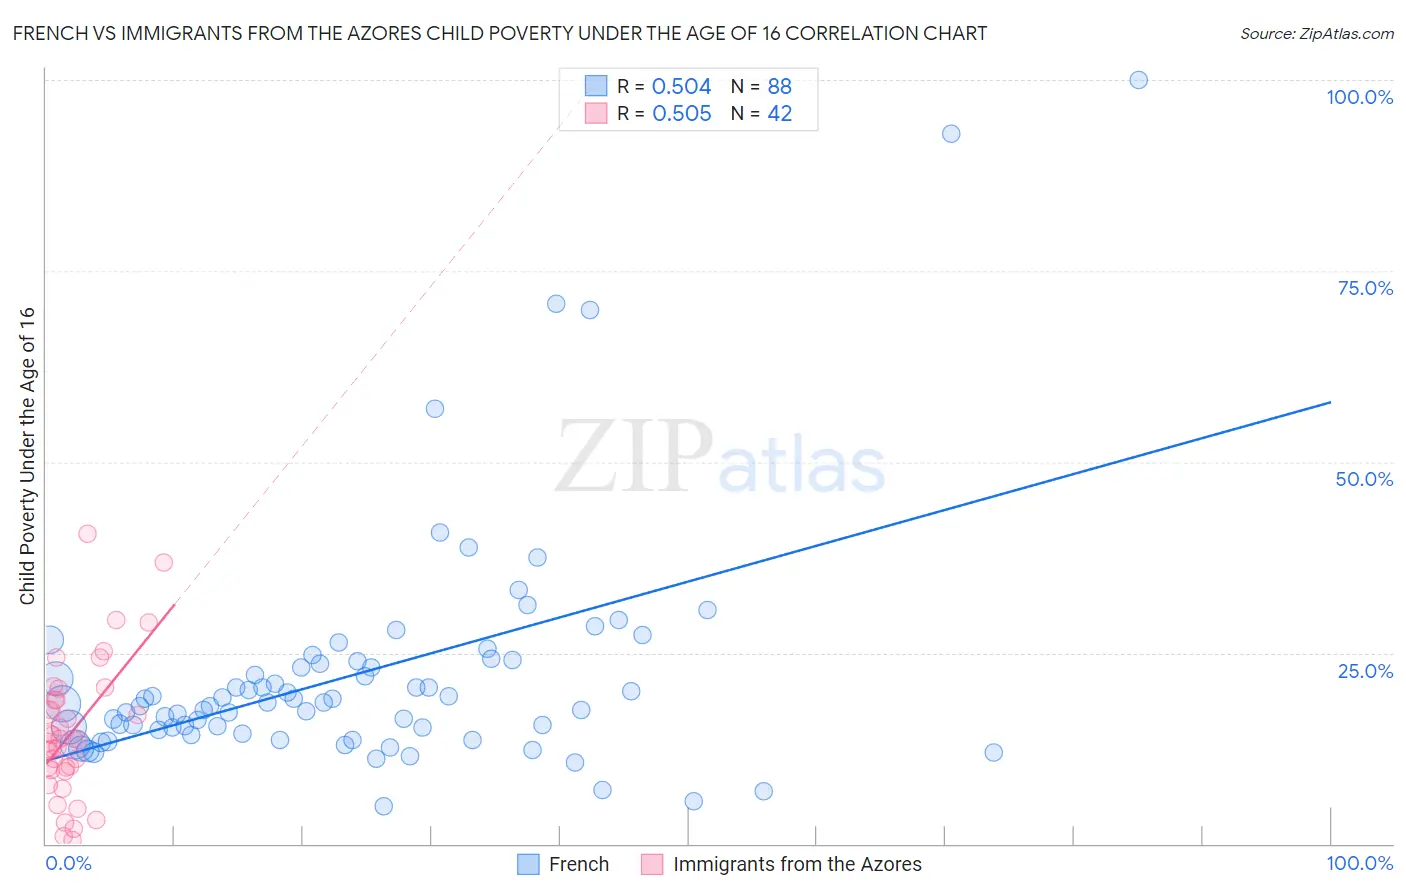 French vs Immigrants from the Azores Child Poverty Under the Age of 16